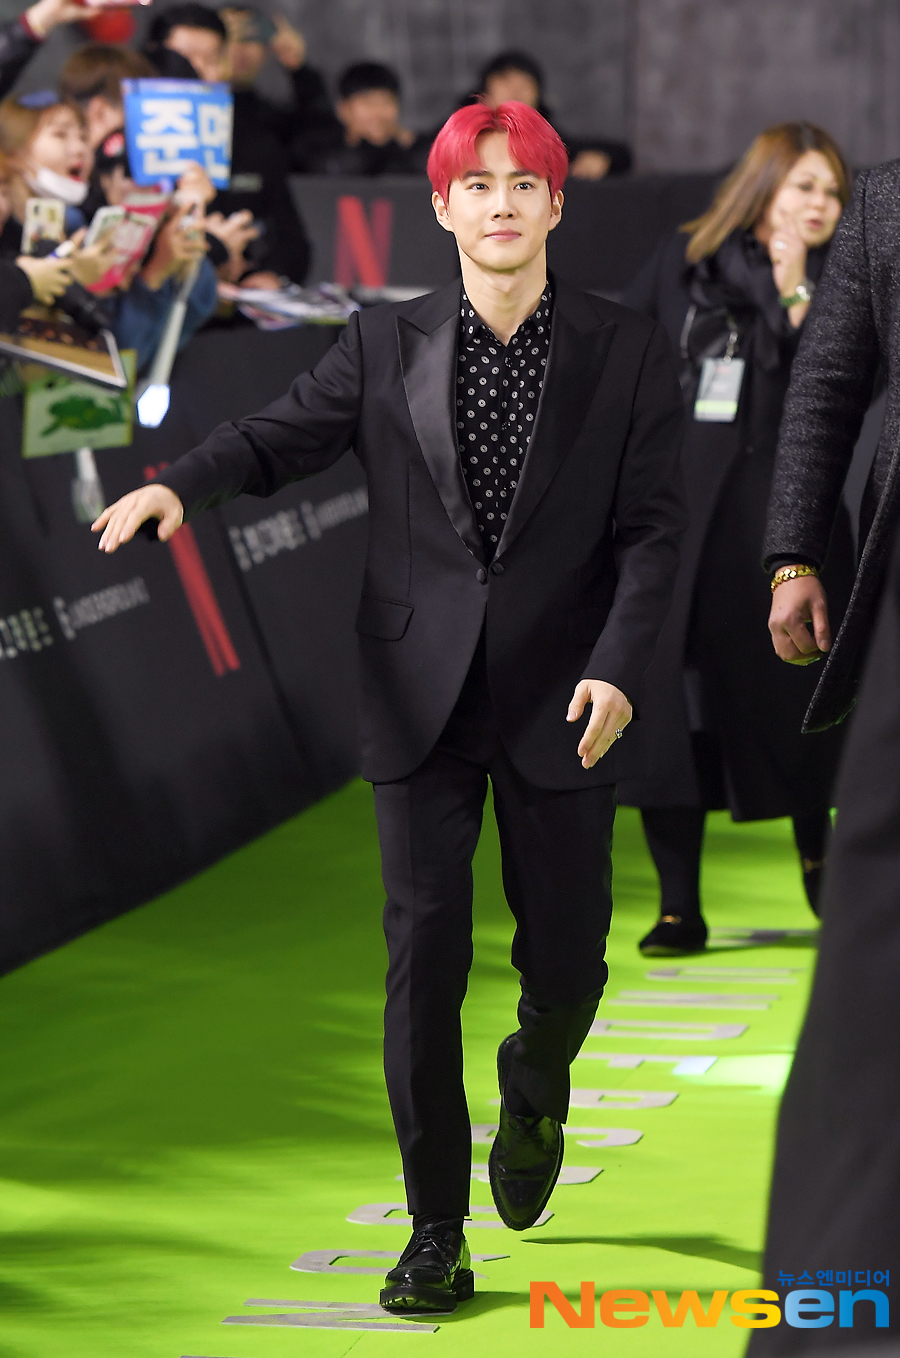 The Green Carpet event in the Netflix movie 6 Underground was held at Dongdaemun Design Plaza (DDP) in Jung-gu, Seoul on the afternoon of December 2.EXO (Suho, Baekhyun, Chen, Chanyeol, Kai and Sehun) are stepping on the green carpet.Jung Yoo-jin